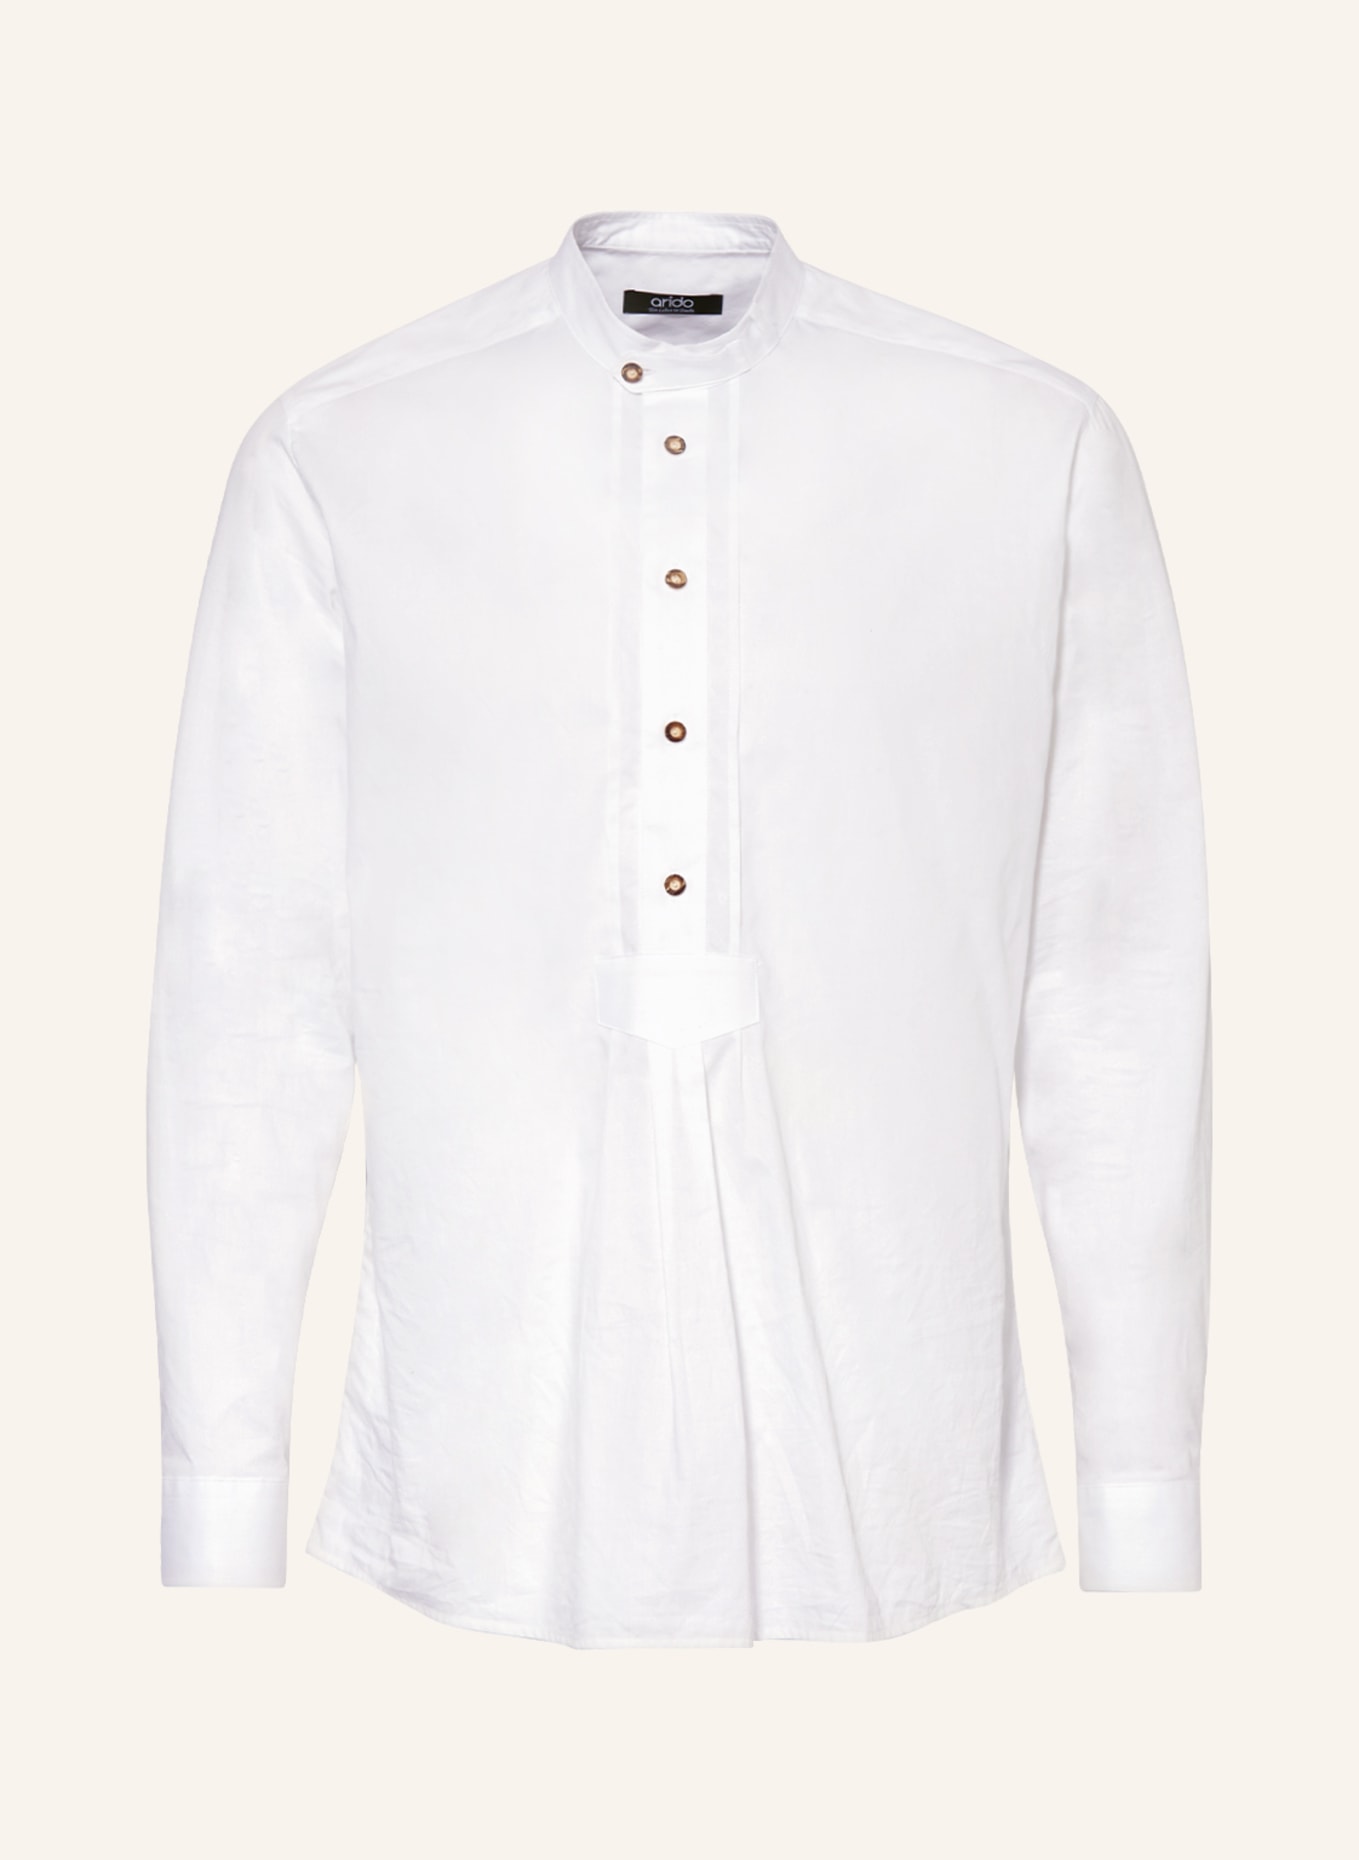 arido Trachten shirt regular fit with stand-up collar, Color: WHITE (Image 1)